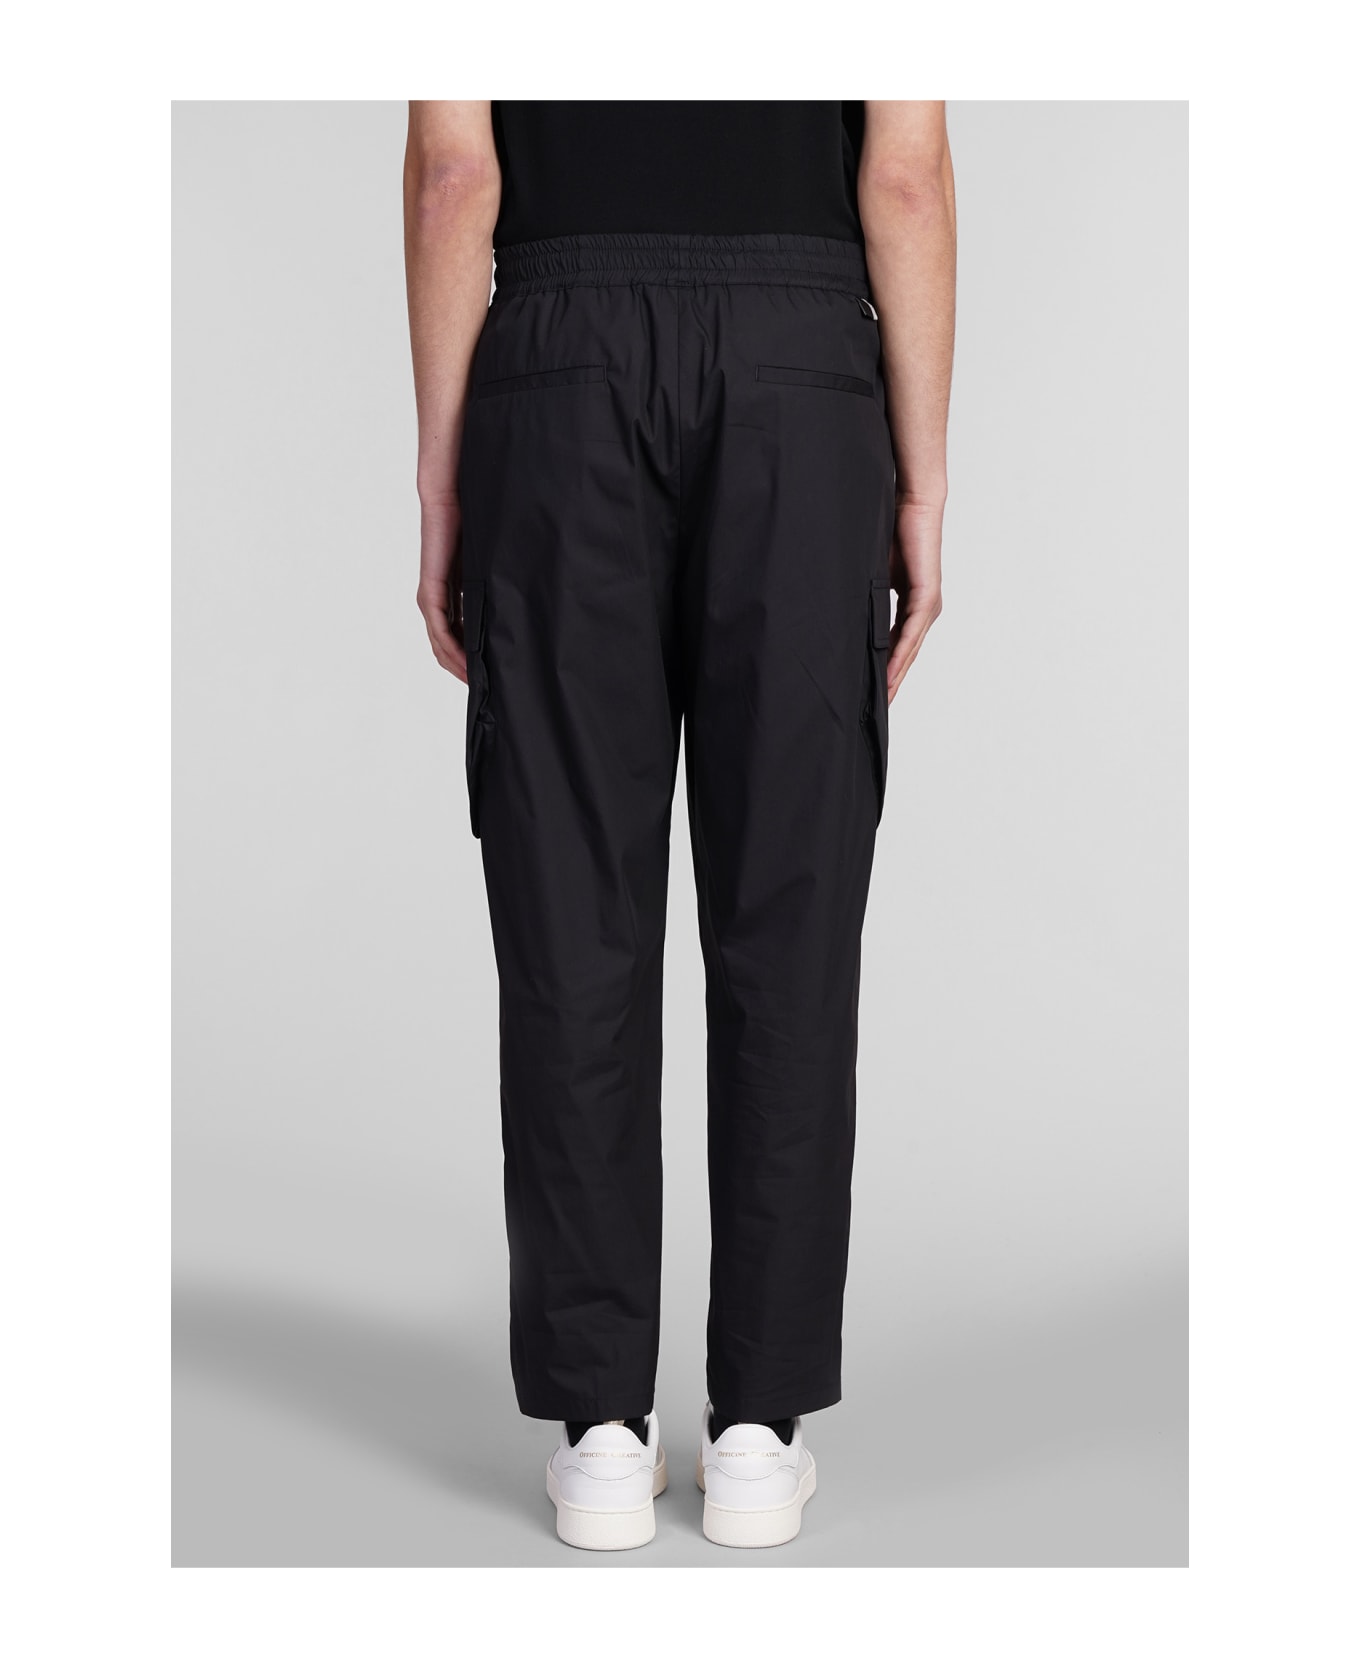 Low Brand Combo Pants In Black Cotton - black